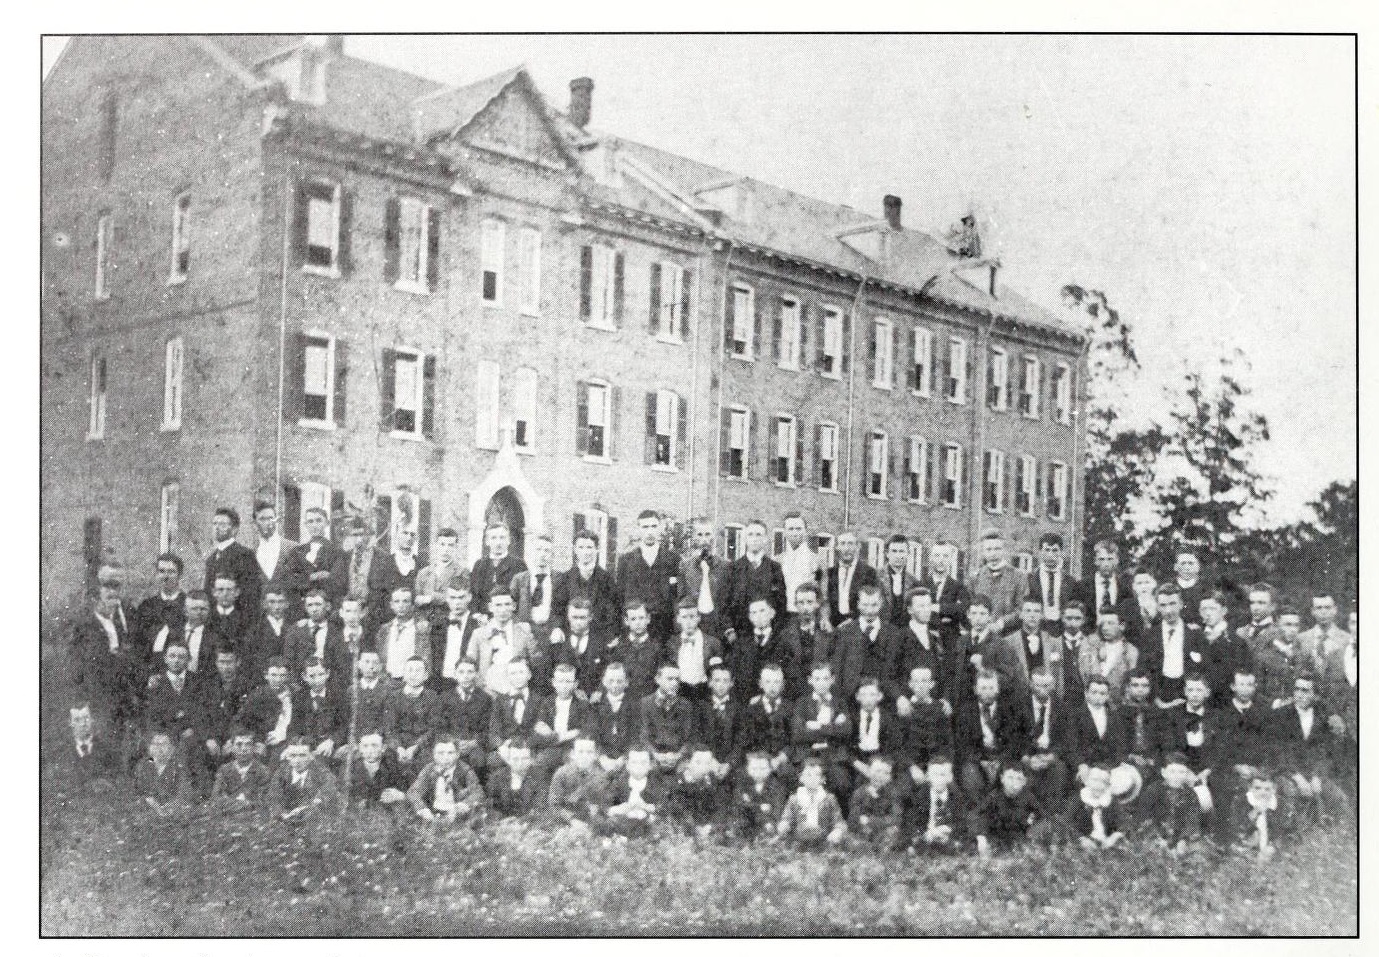 College students pictured outside of Stowe Hall, c. 1894.